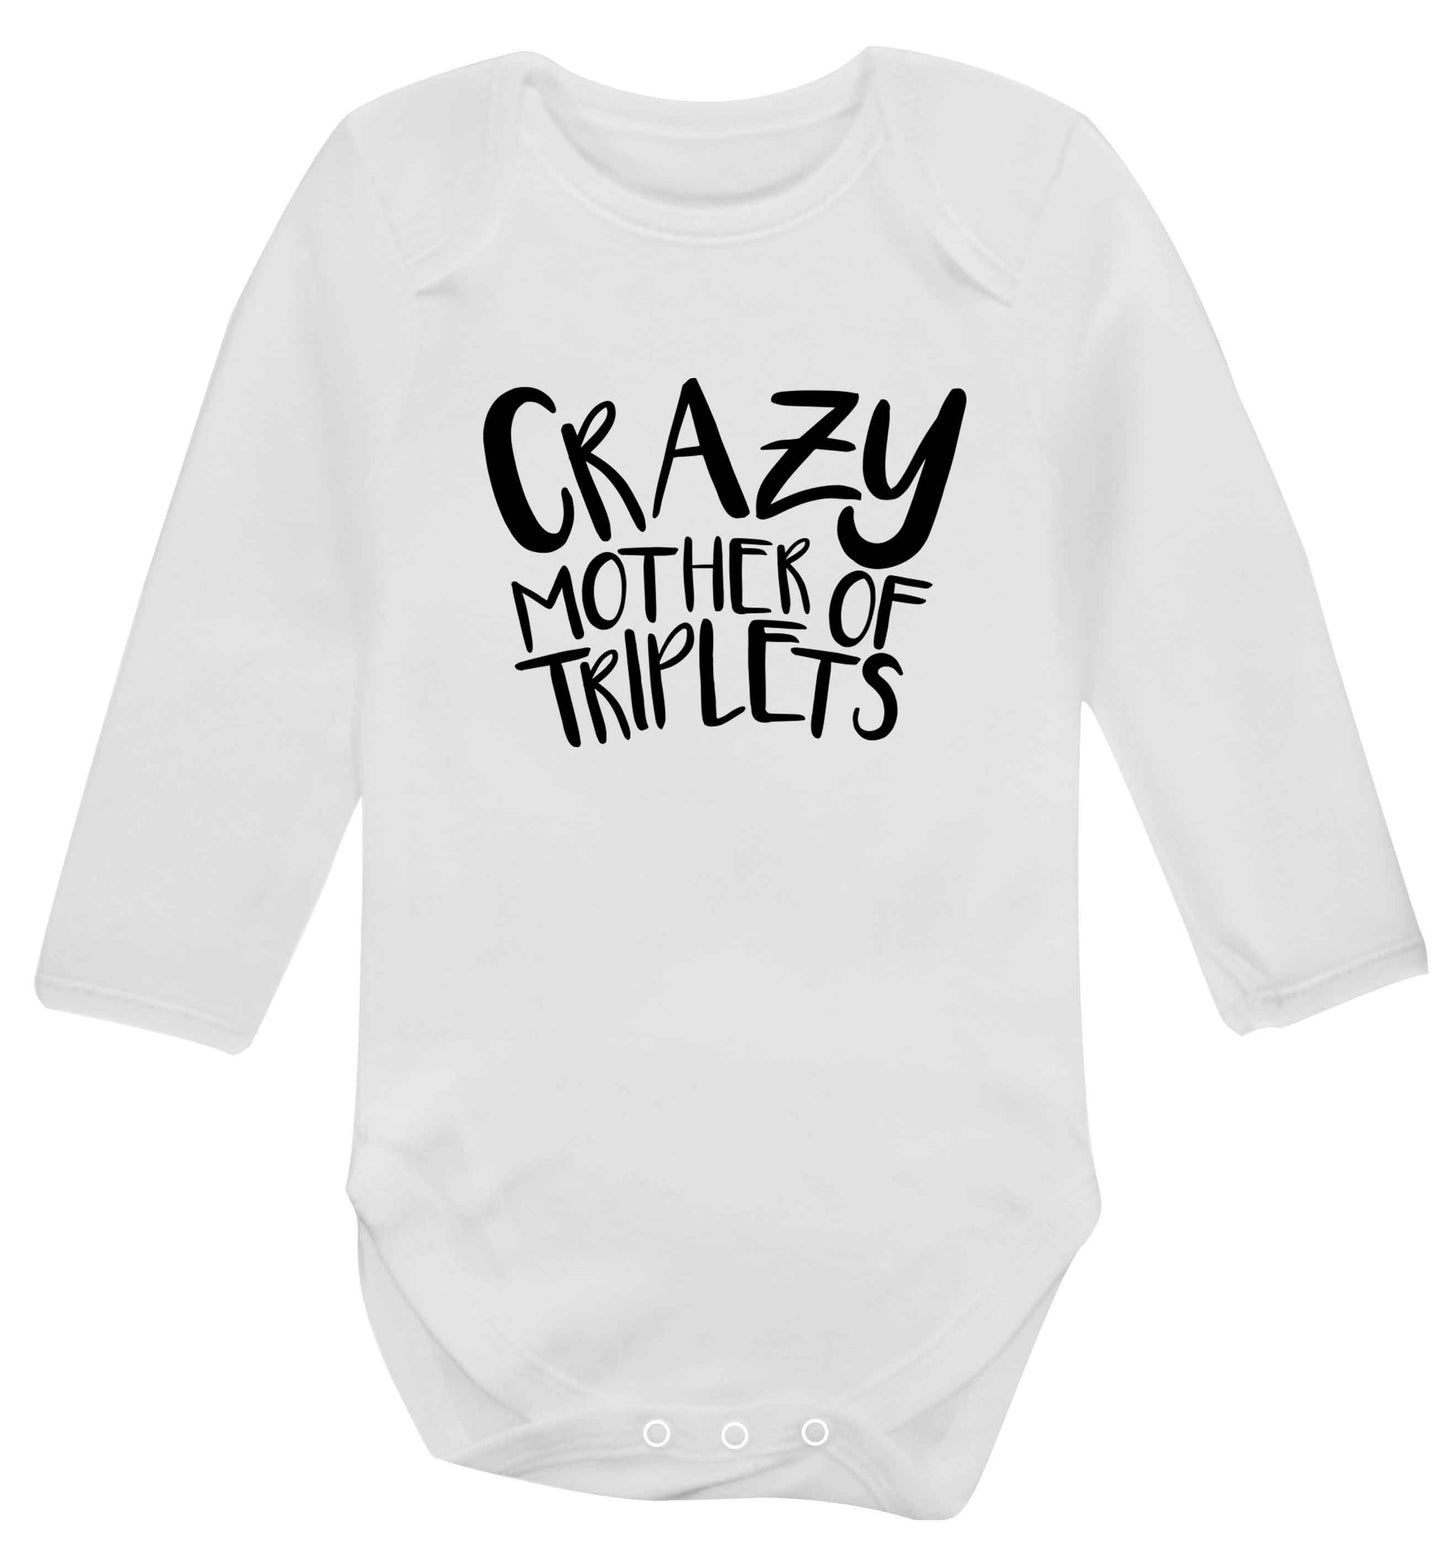 Crazy mother of triplets baby vest long sleeved white 6-12 months